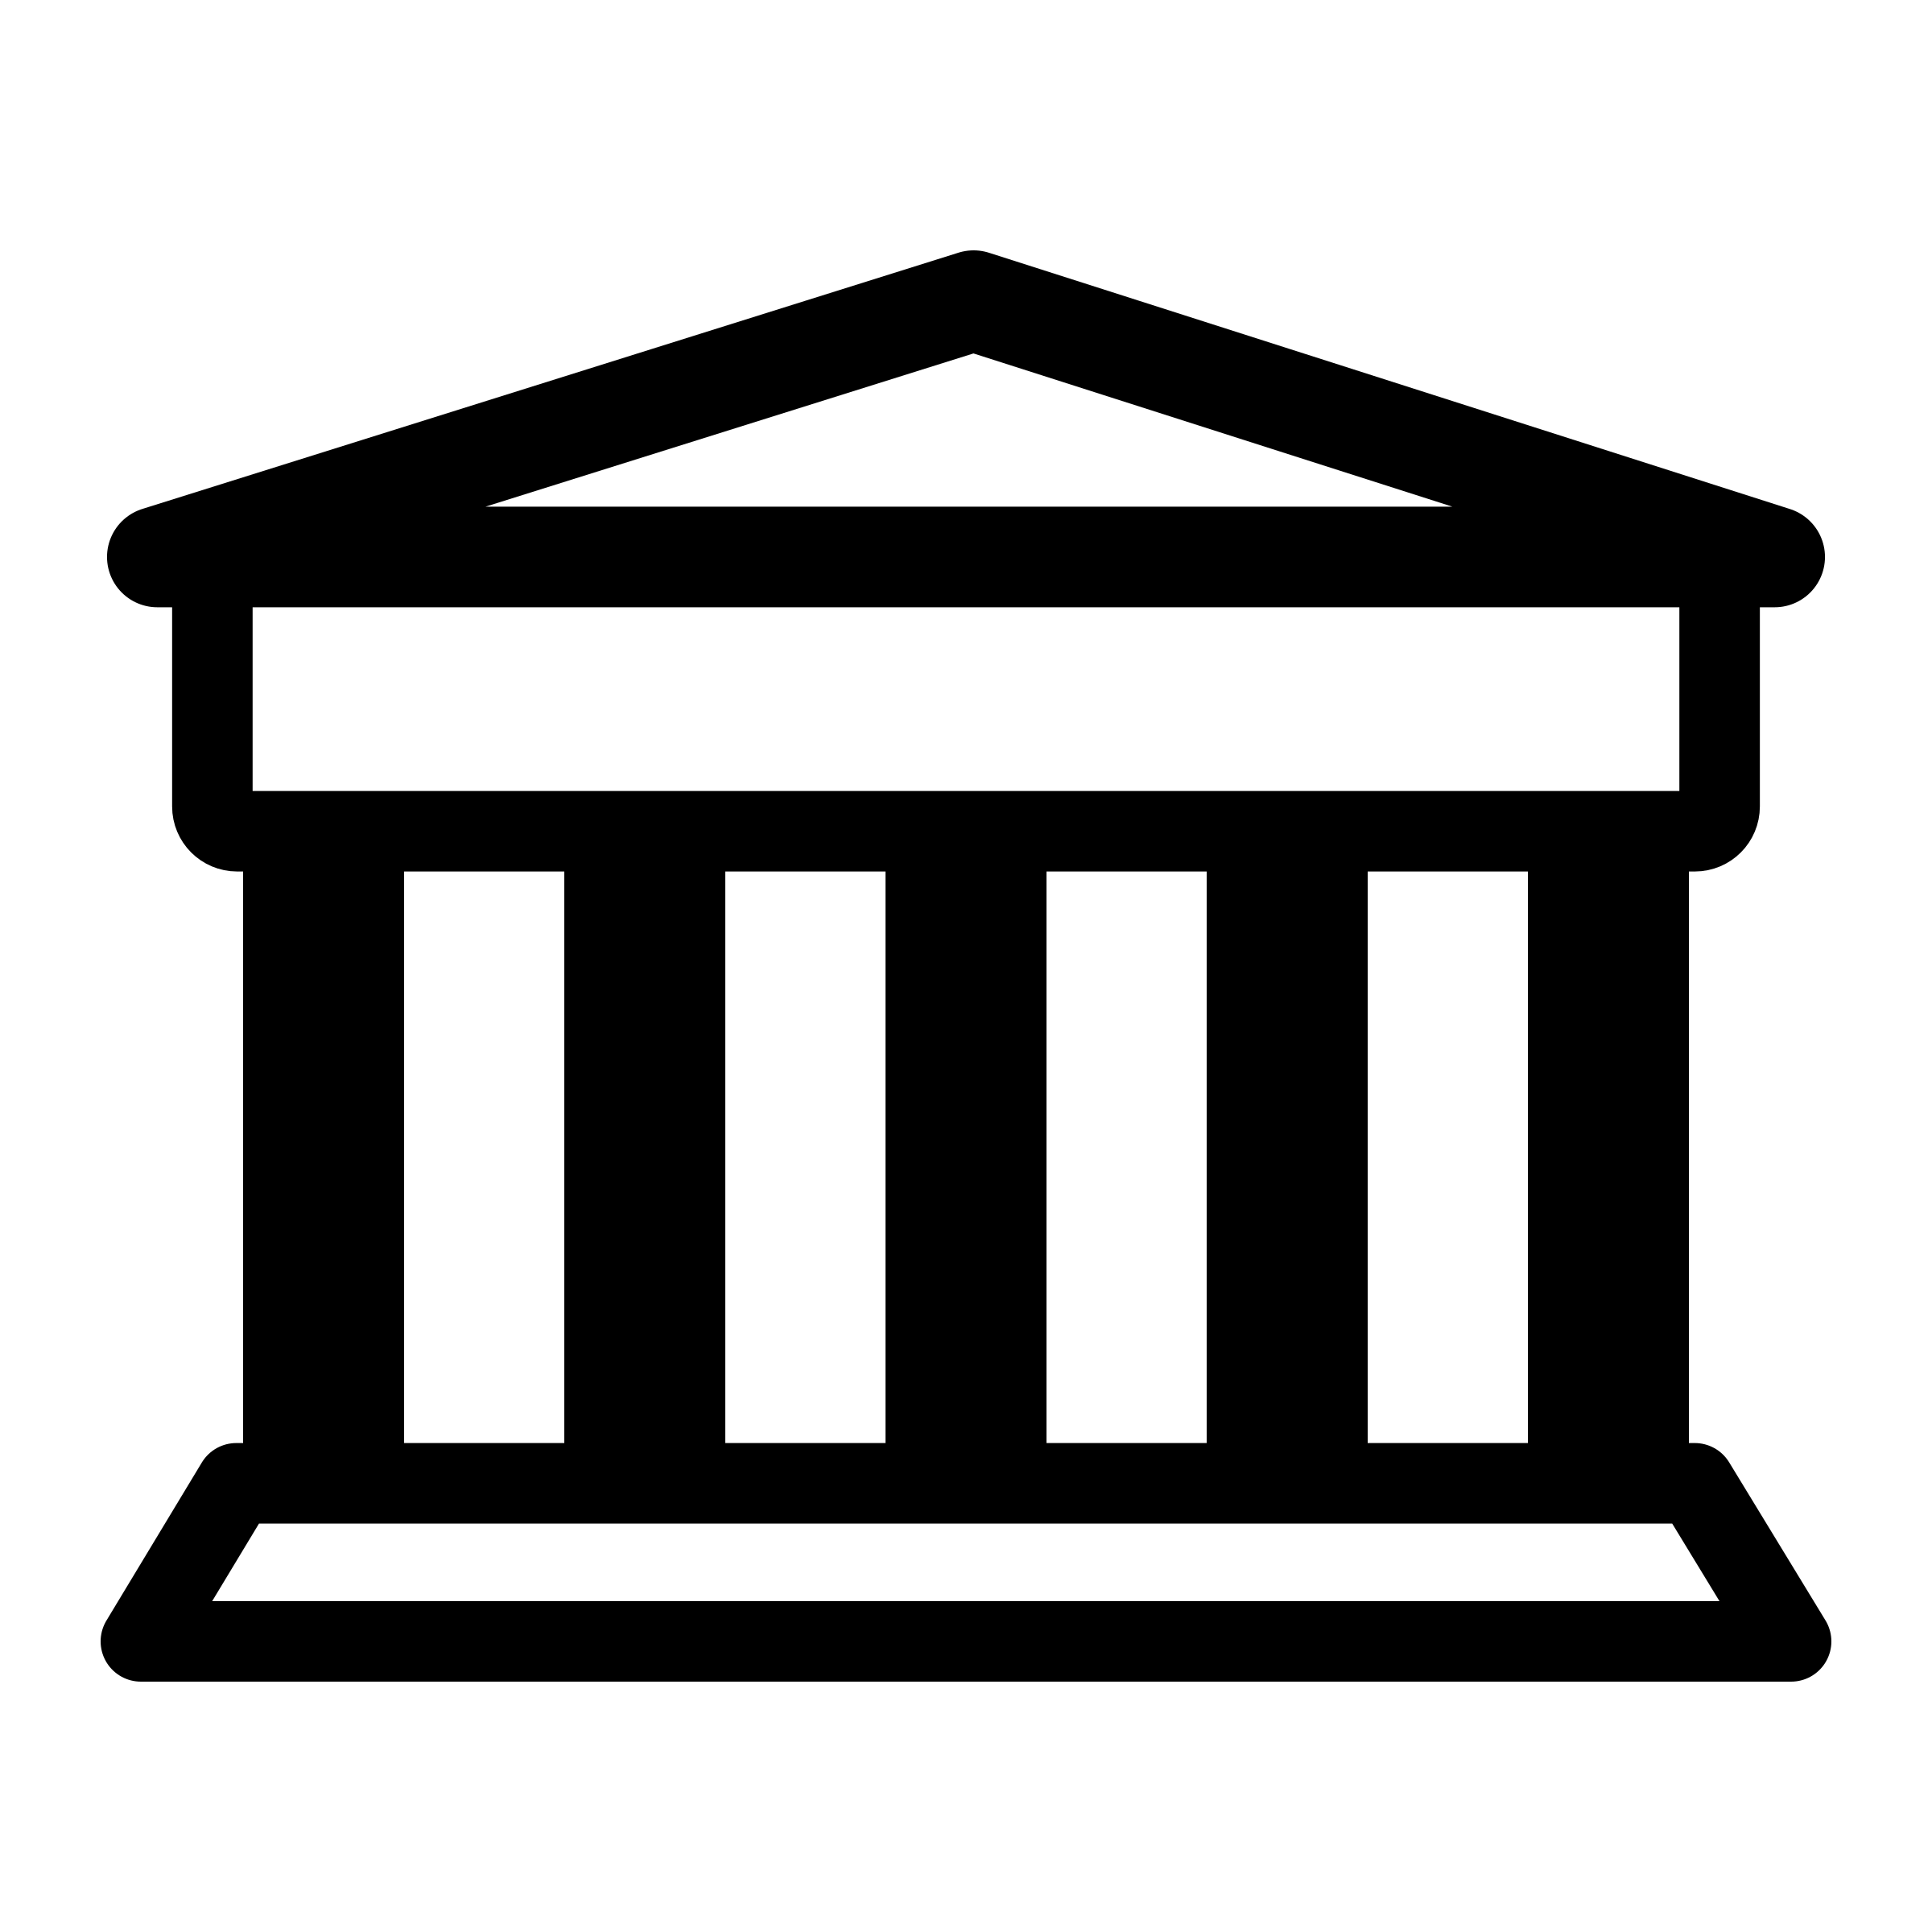 Bank icon clipart image